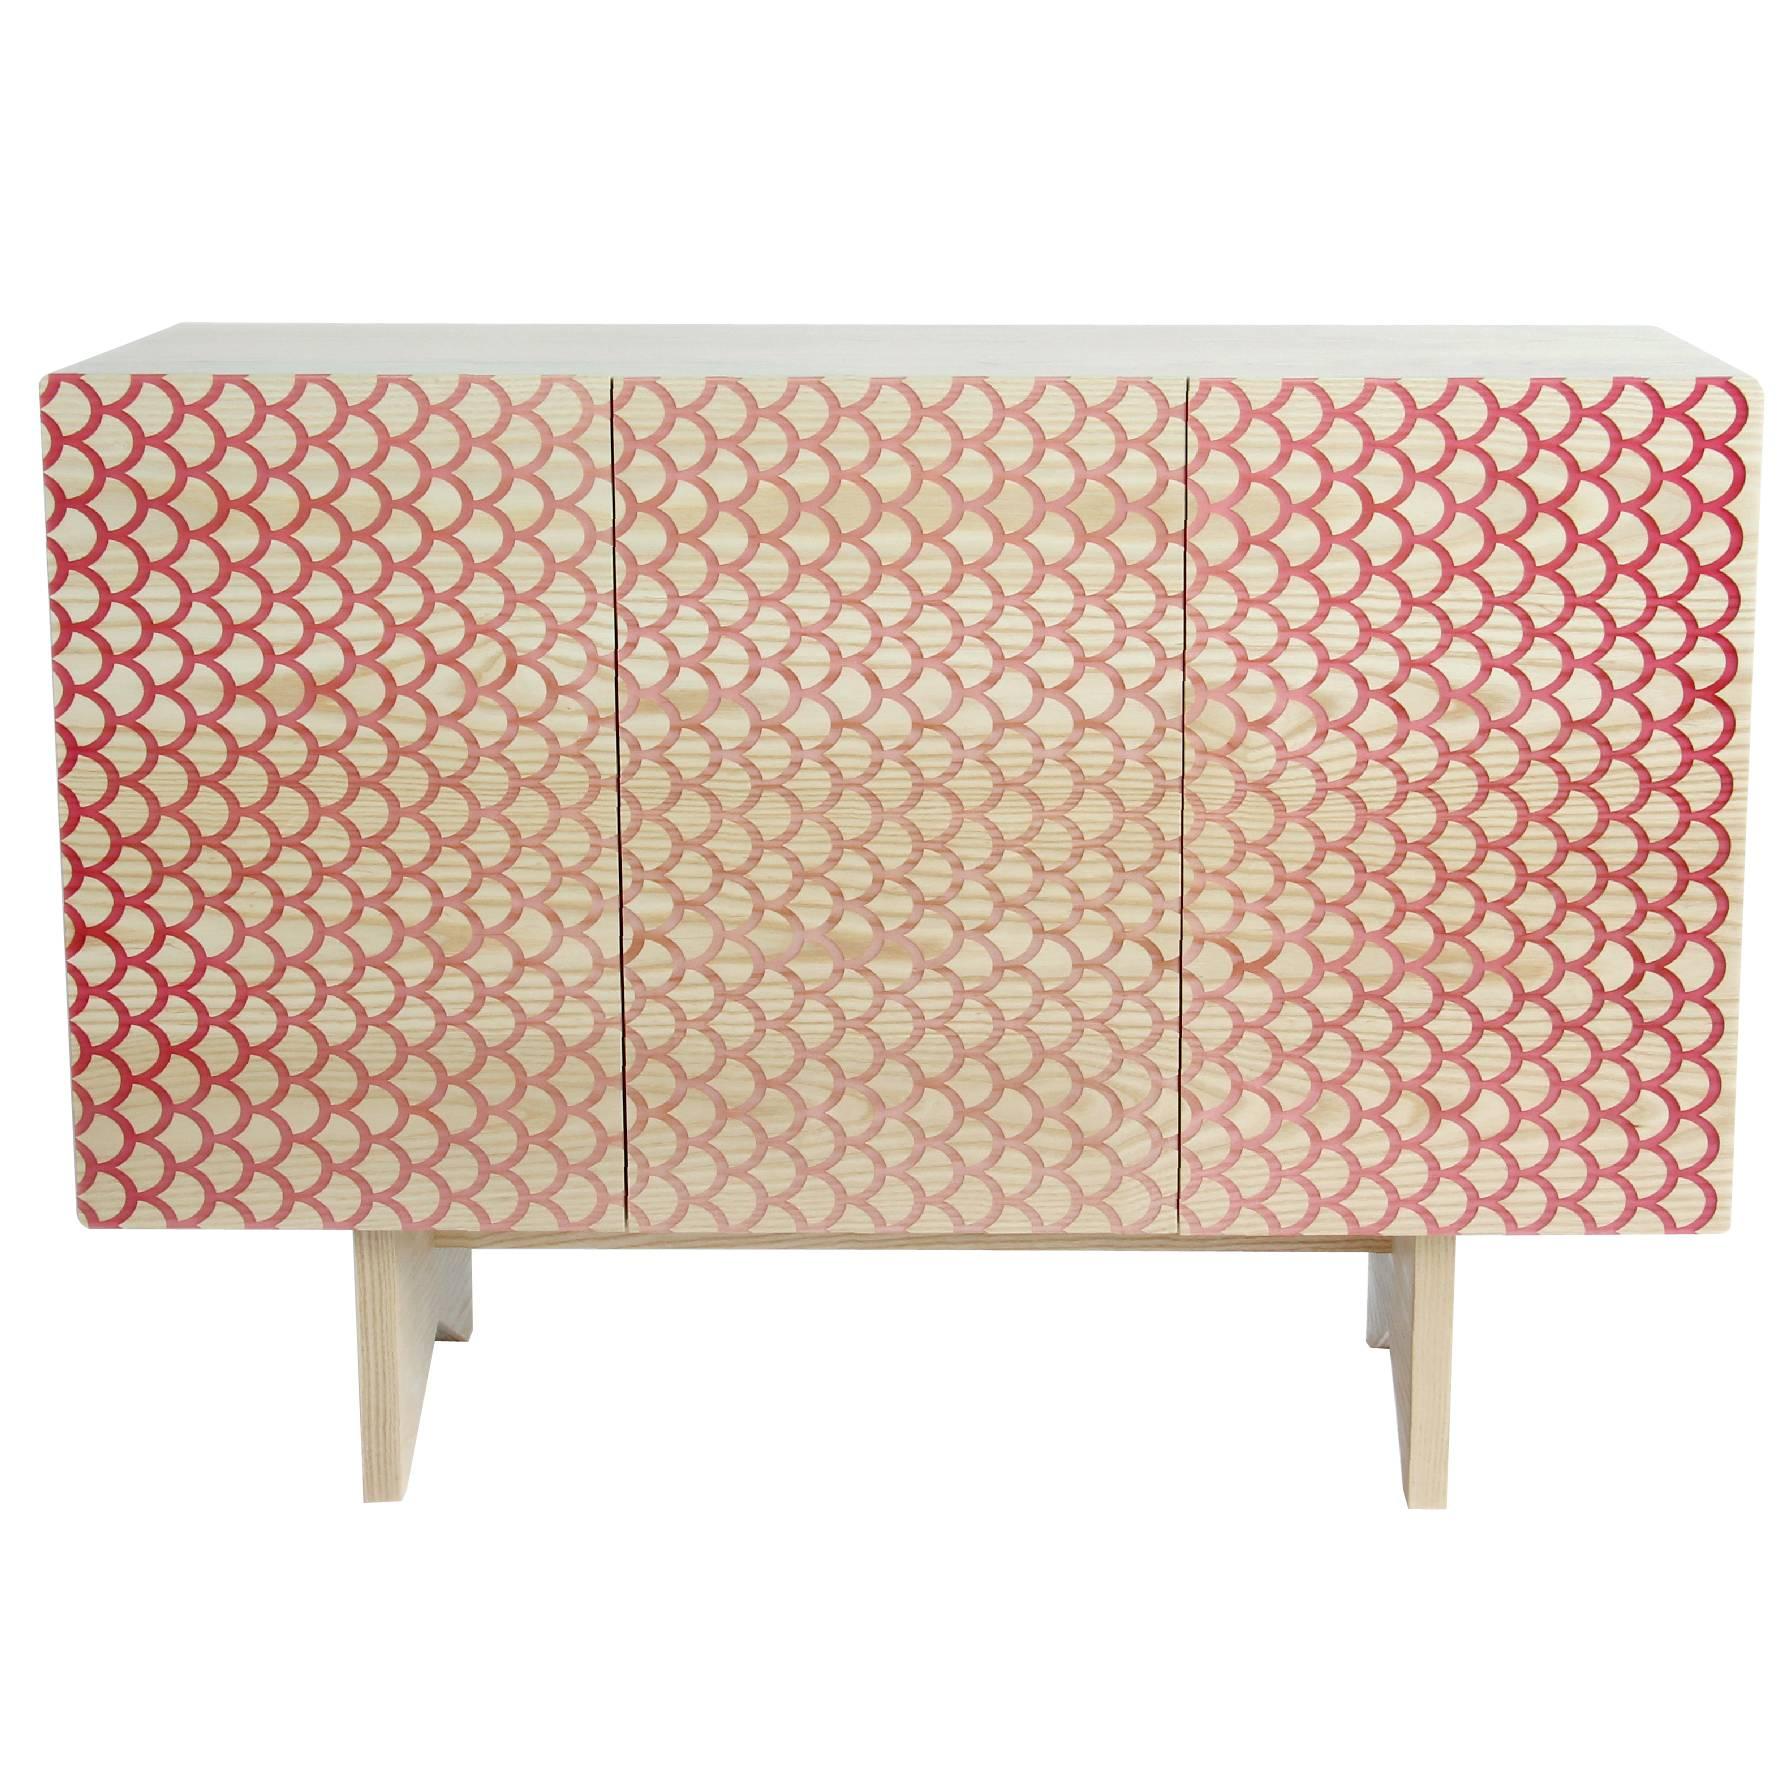 Custom Koi Credenza in Ash, Inlaid with Translucent Red Resin For Sale